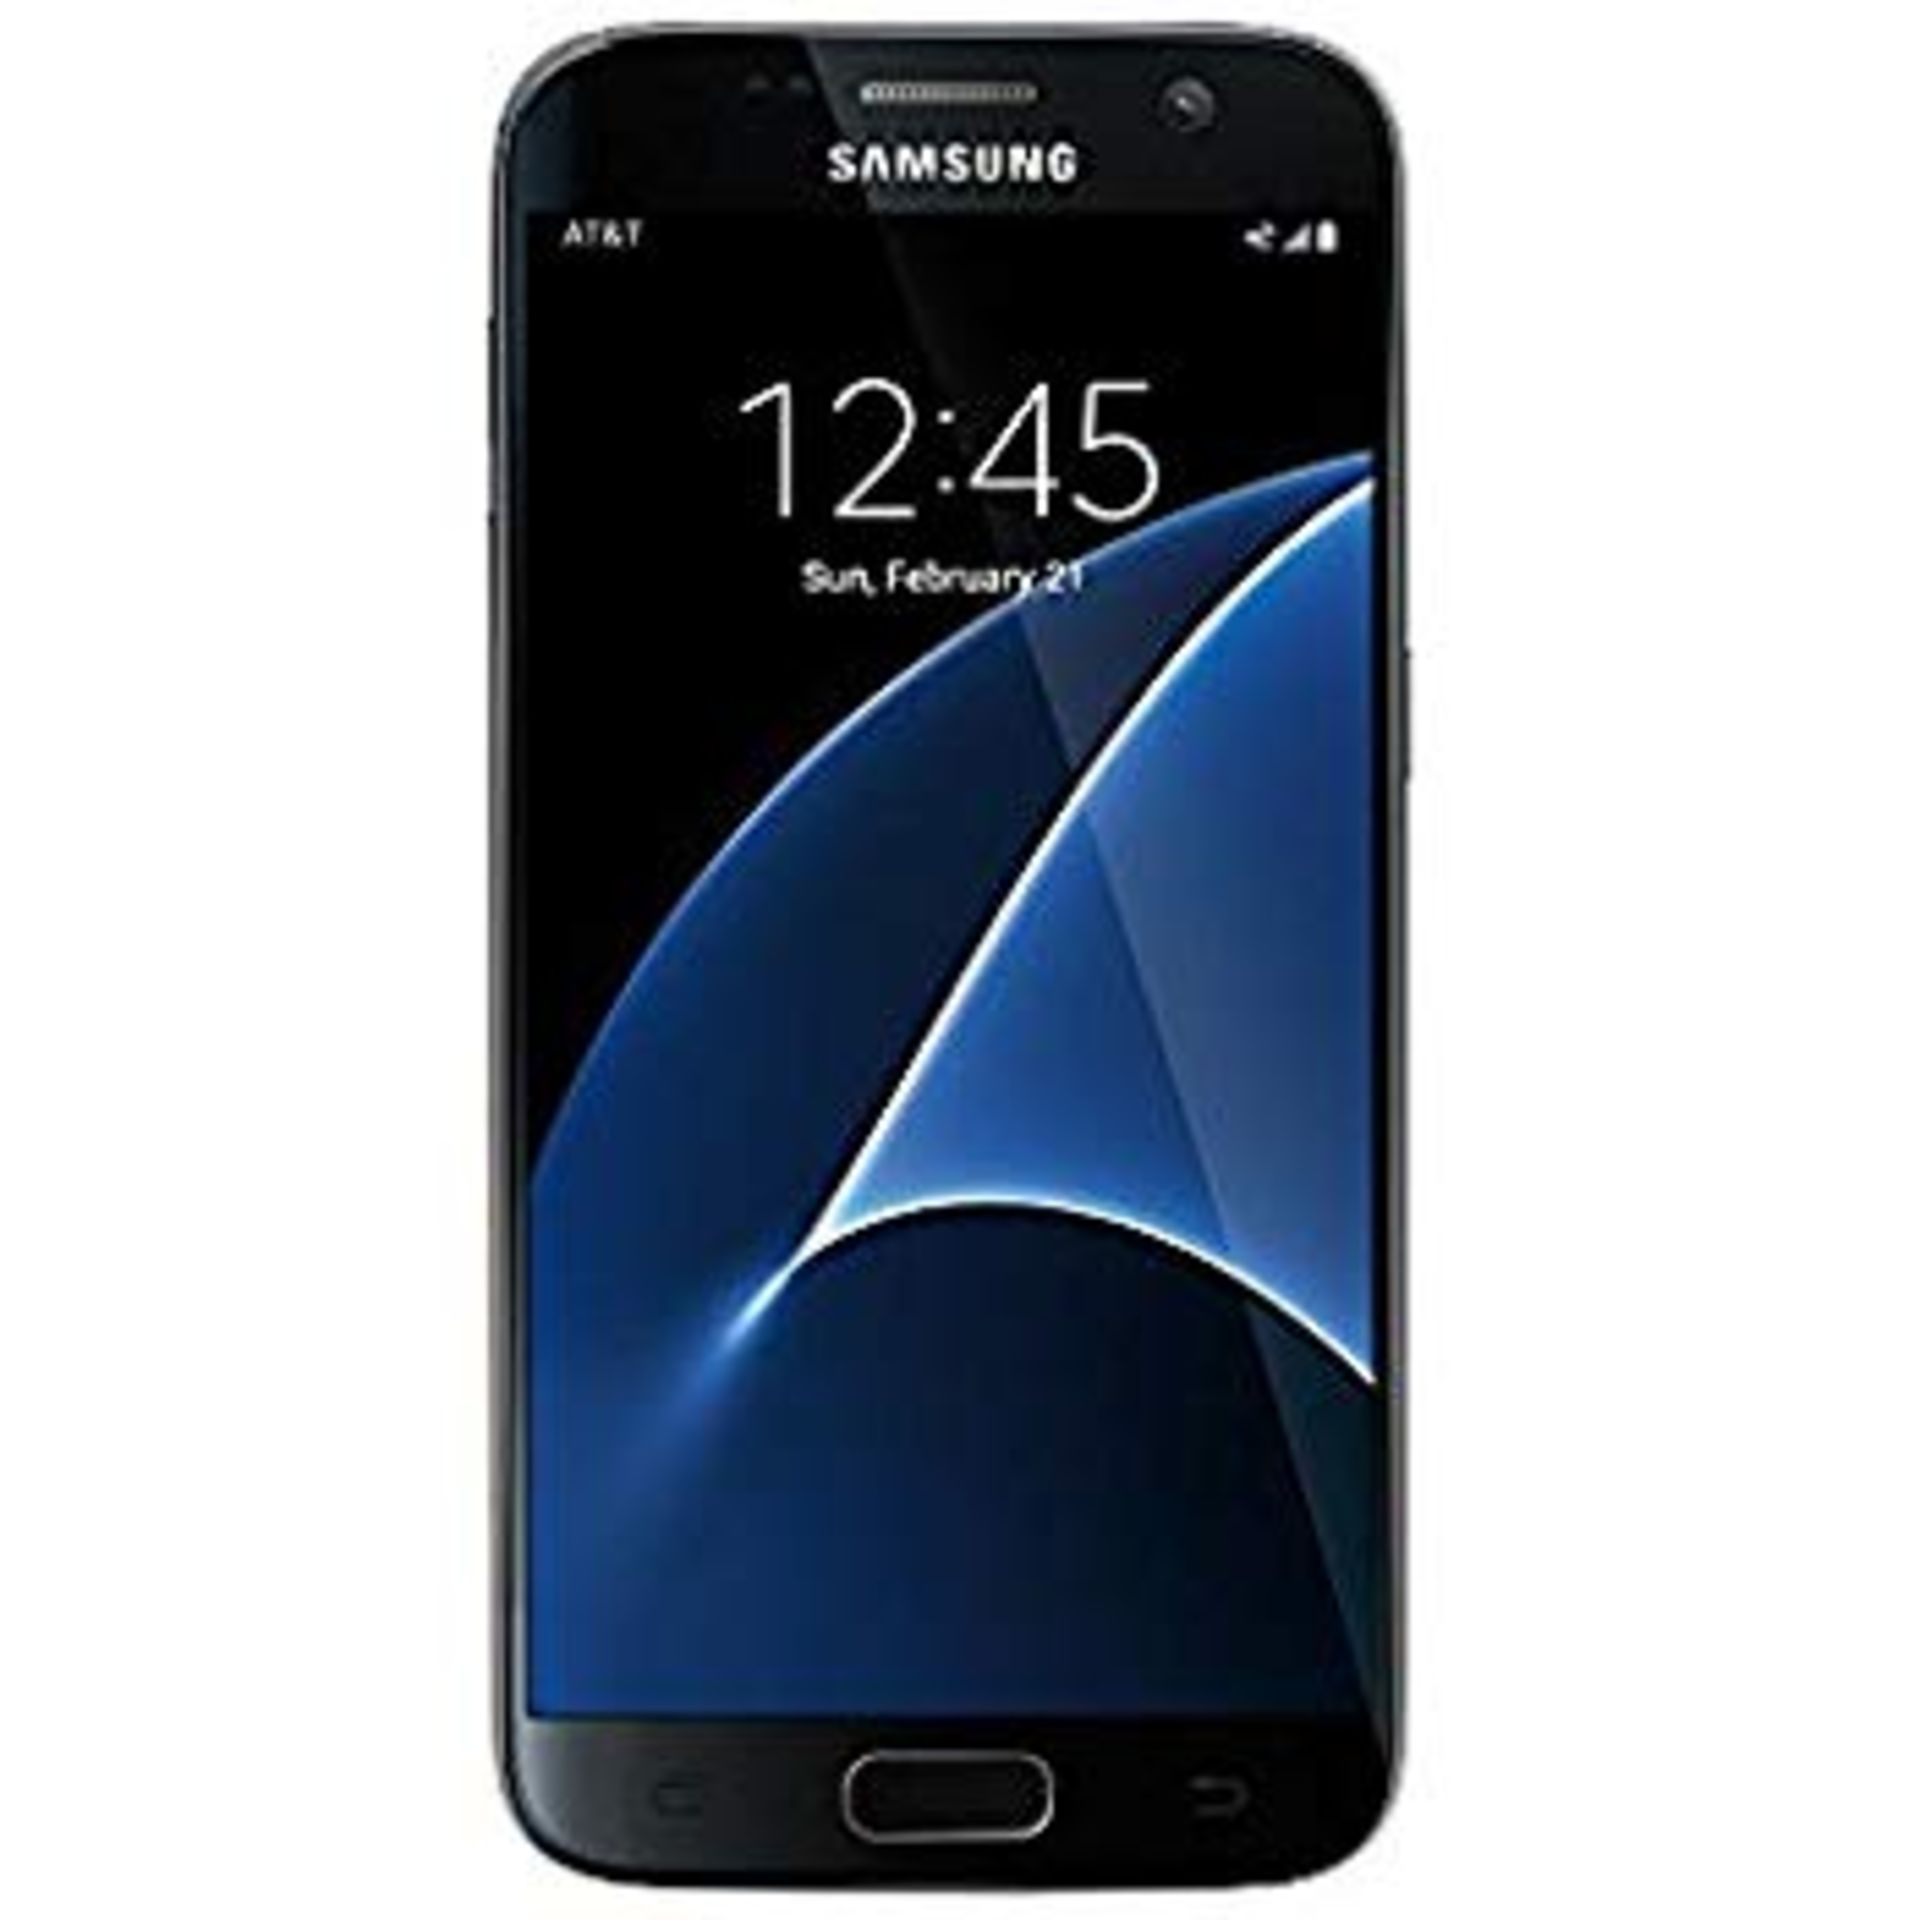 Grade A Samsung S7 ( G930A/T/V/P ) Colours May Vary - Item Available After Approx 12 Working Days